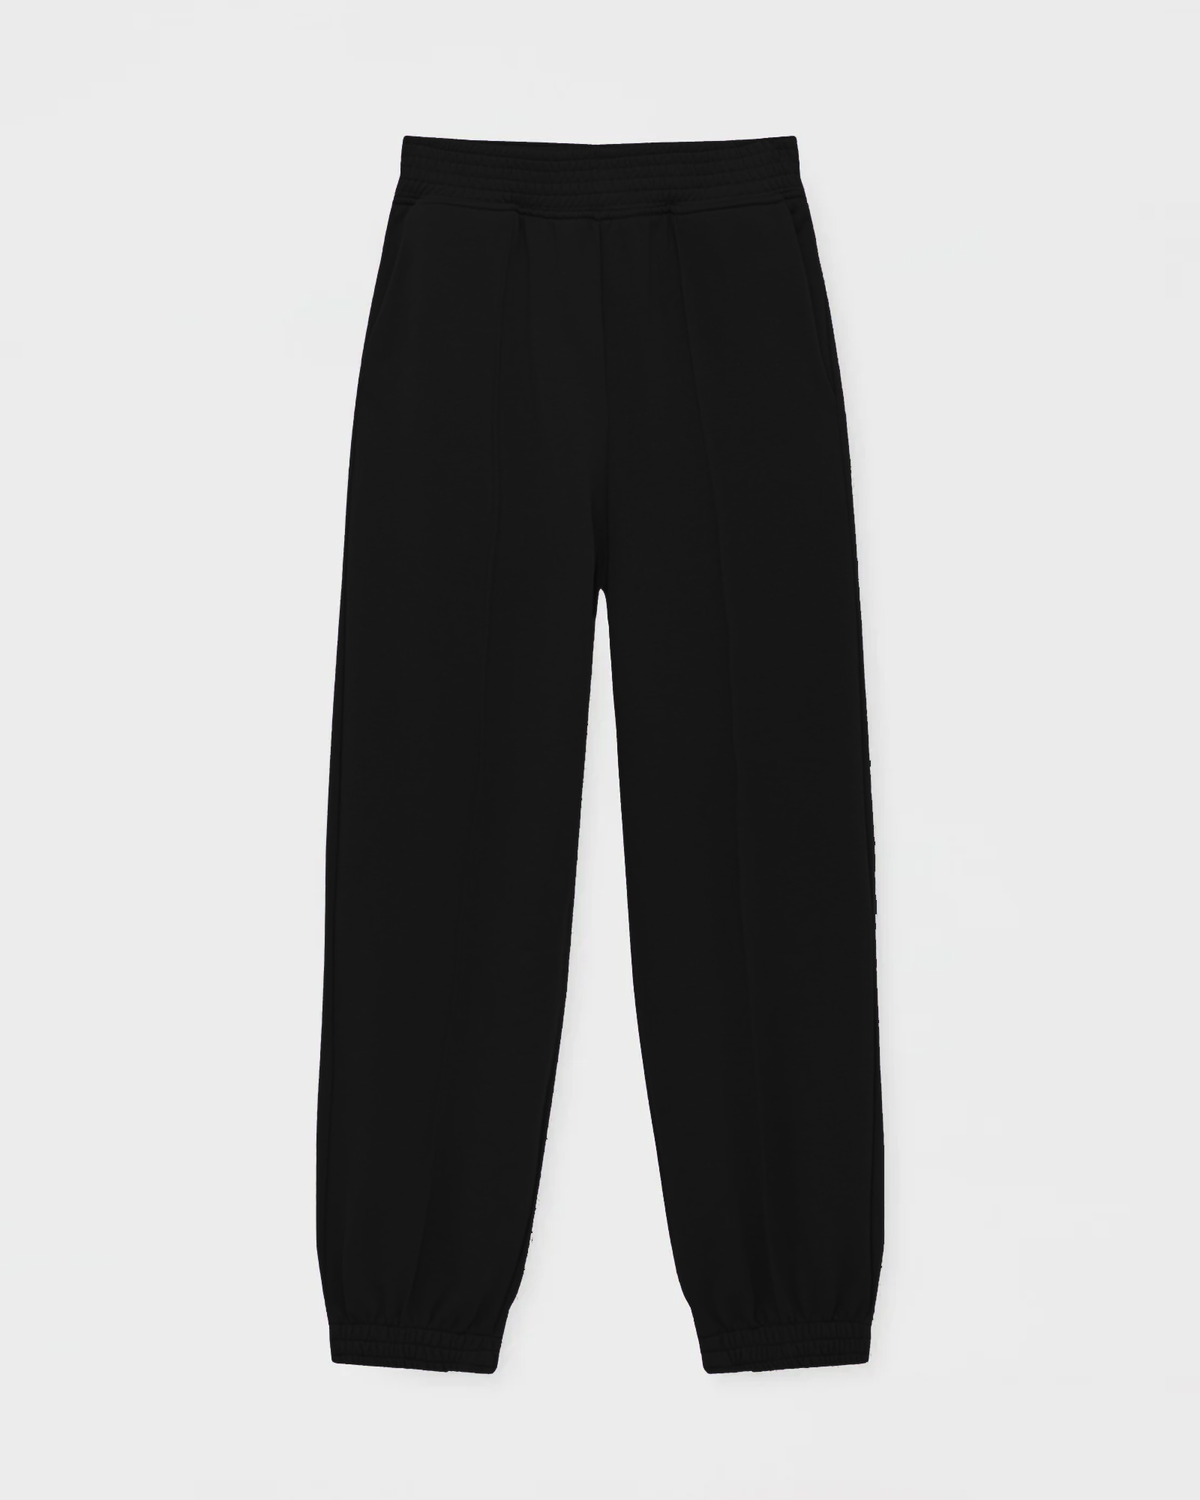 Women's Solid Jogger